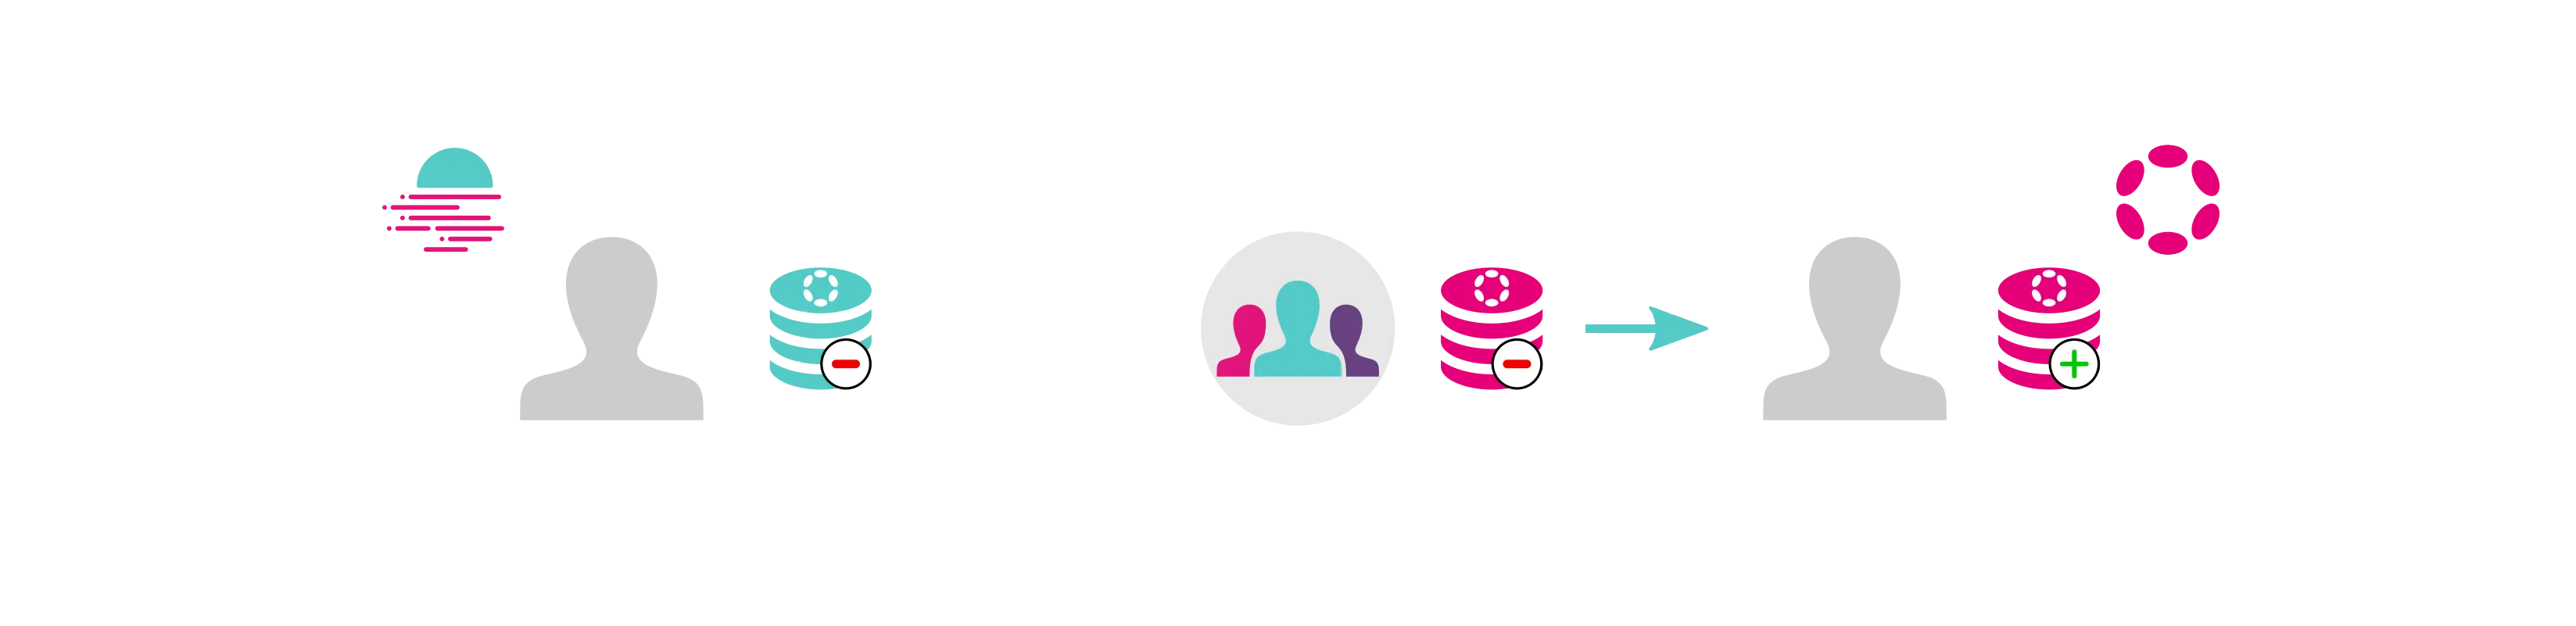 Transfers Back from Moonbeam to the Relay Chain